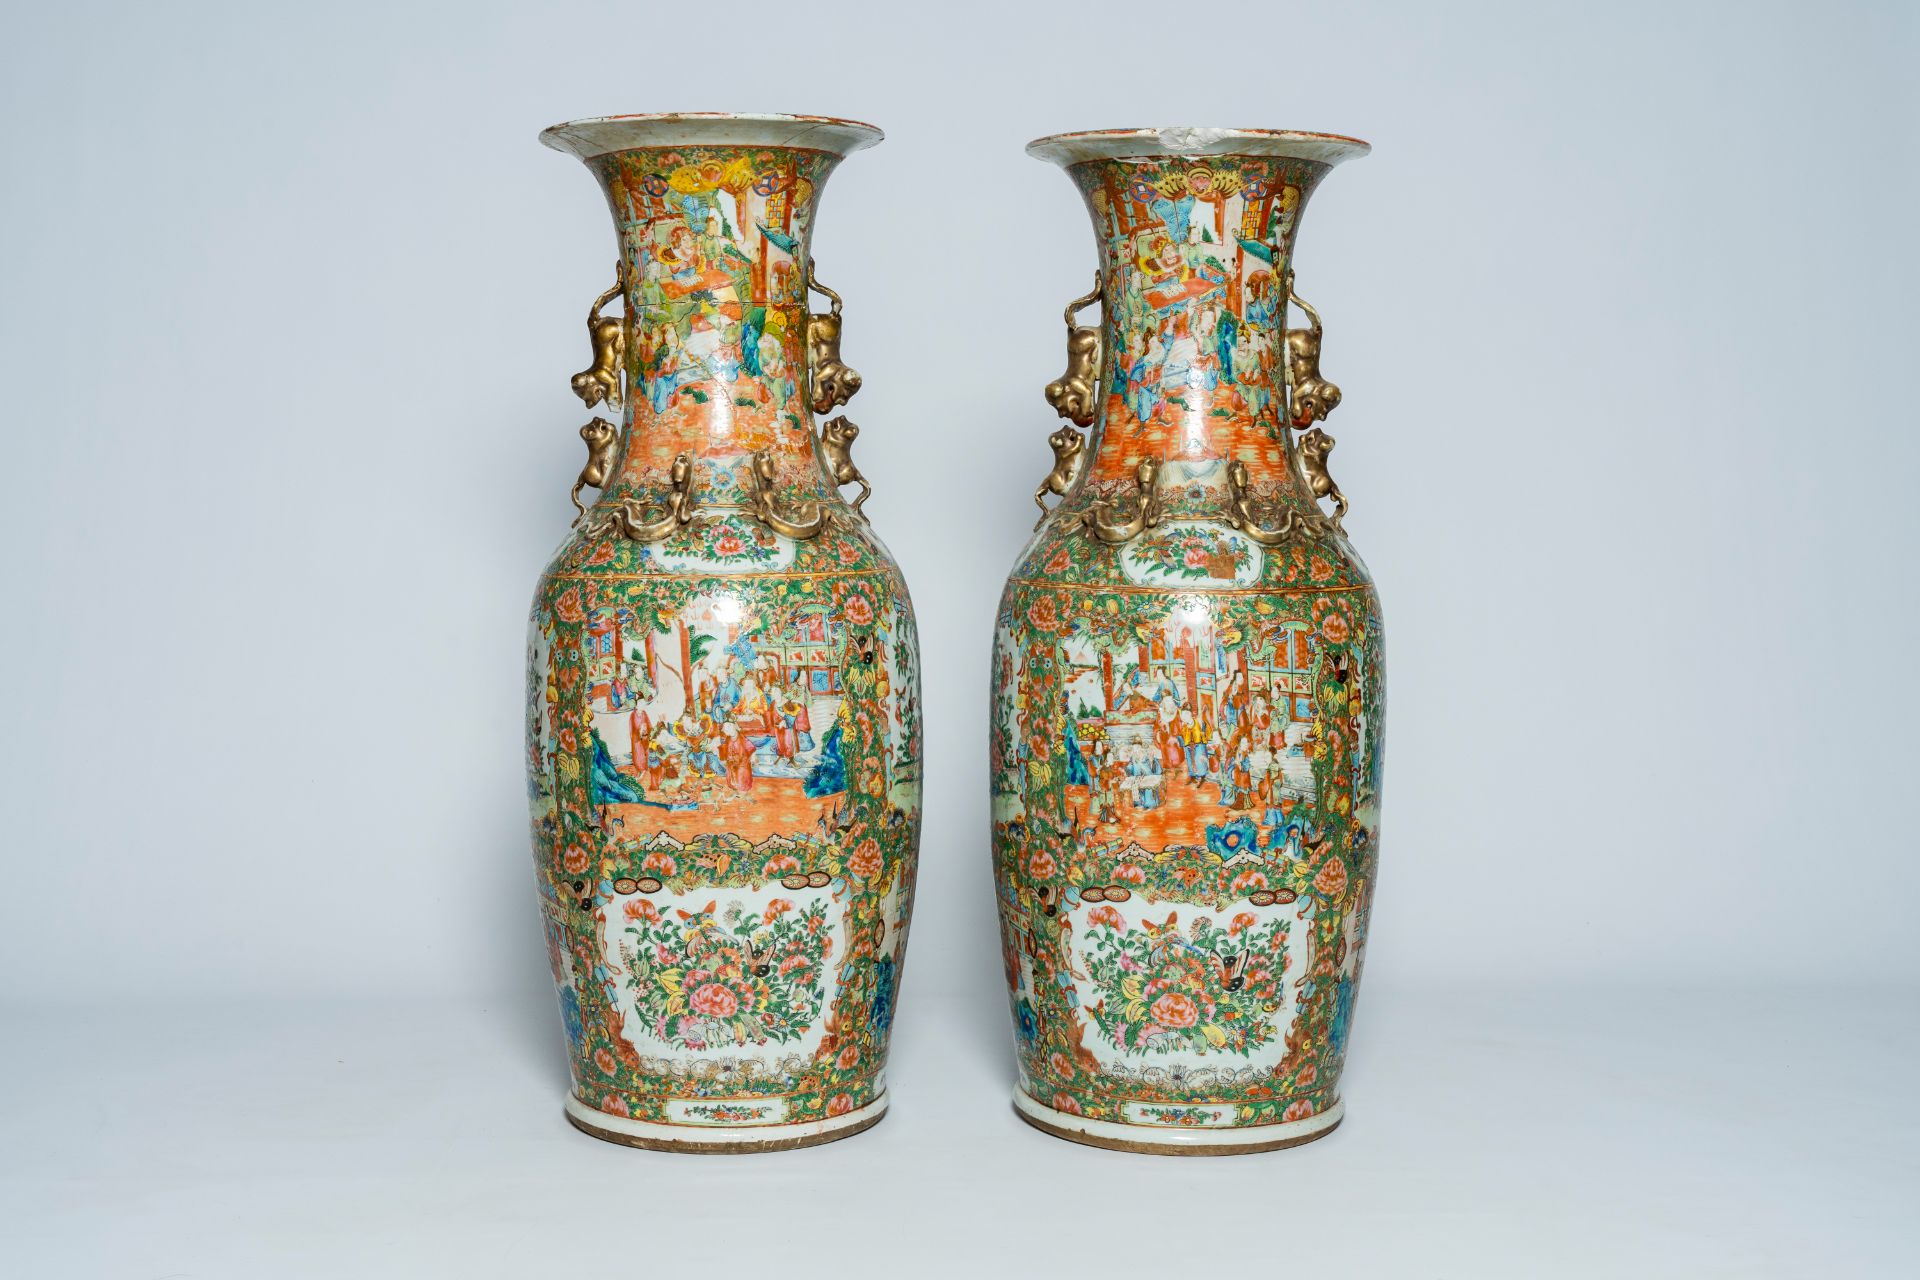 A pair of large Chinese Canton famille rose vases with palace scenes and floral design, 19th C. - Image 3 of 6